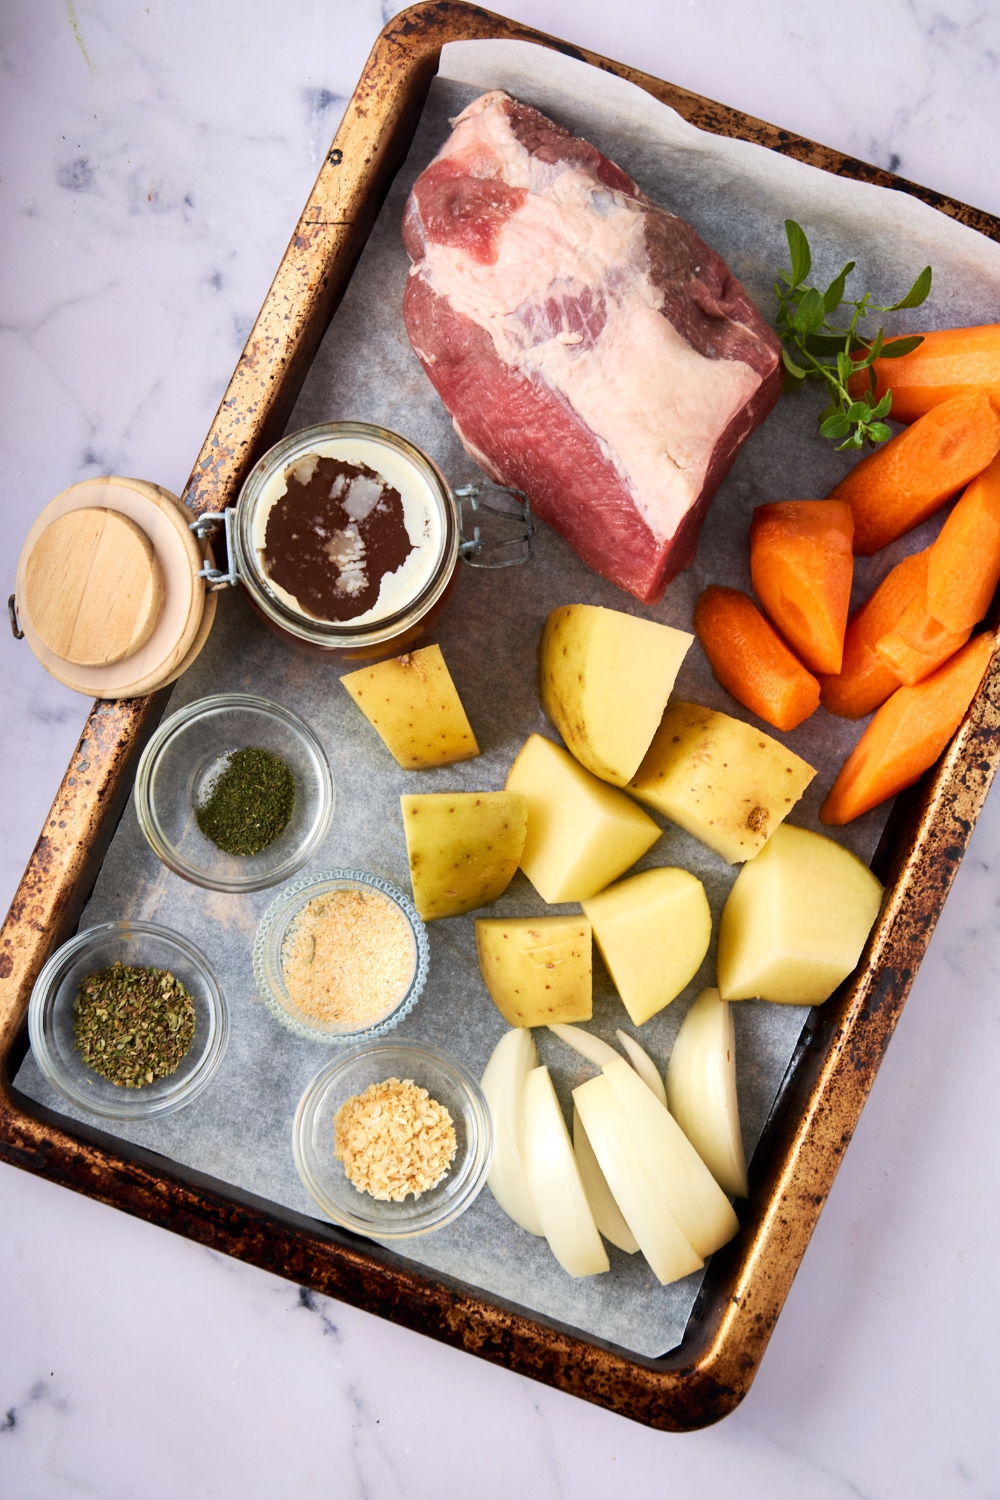 A baking tray is full of sliced carrots, potatoes, onion, seasonings in separate bowls, a jar of beef broth, and a frozen roast.